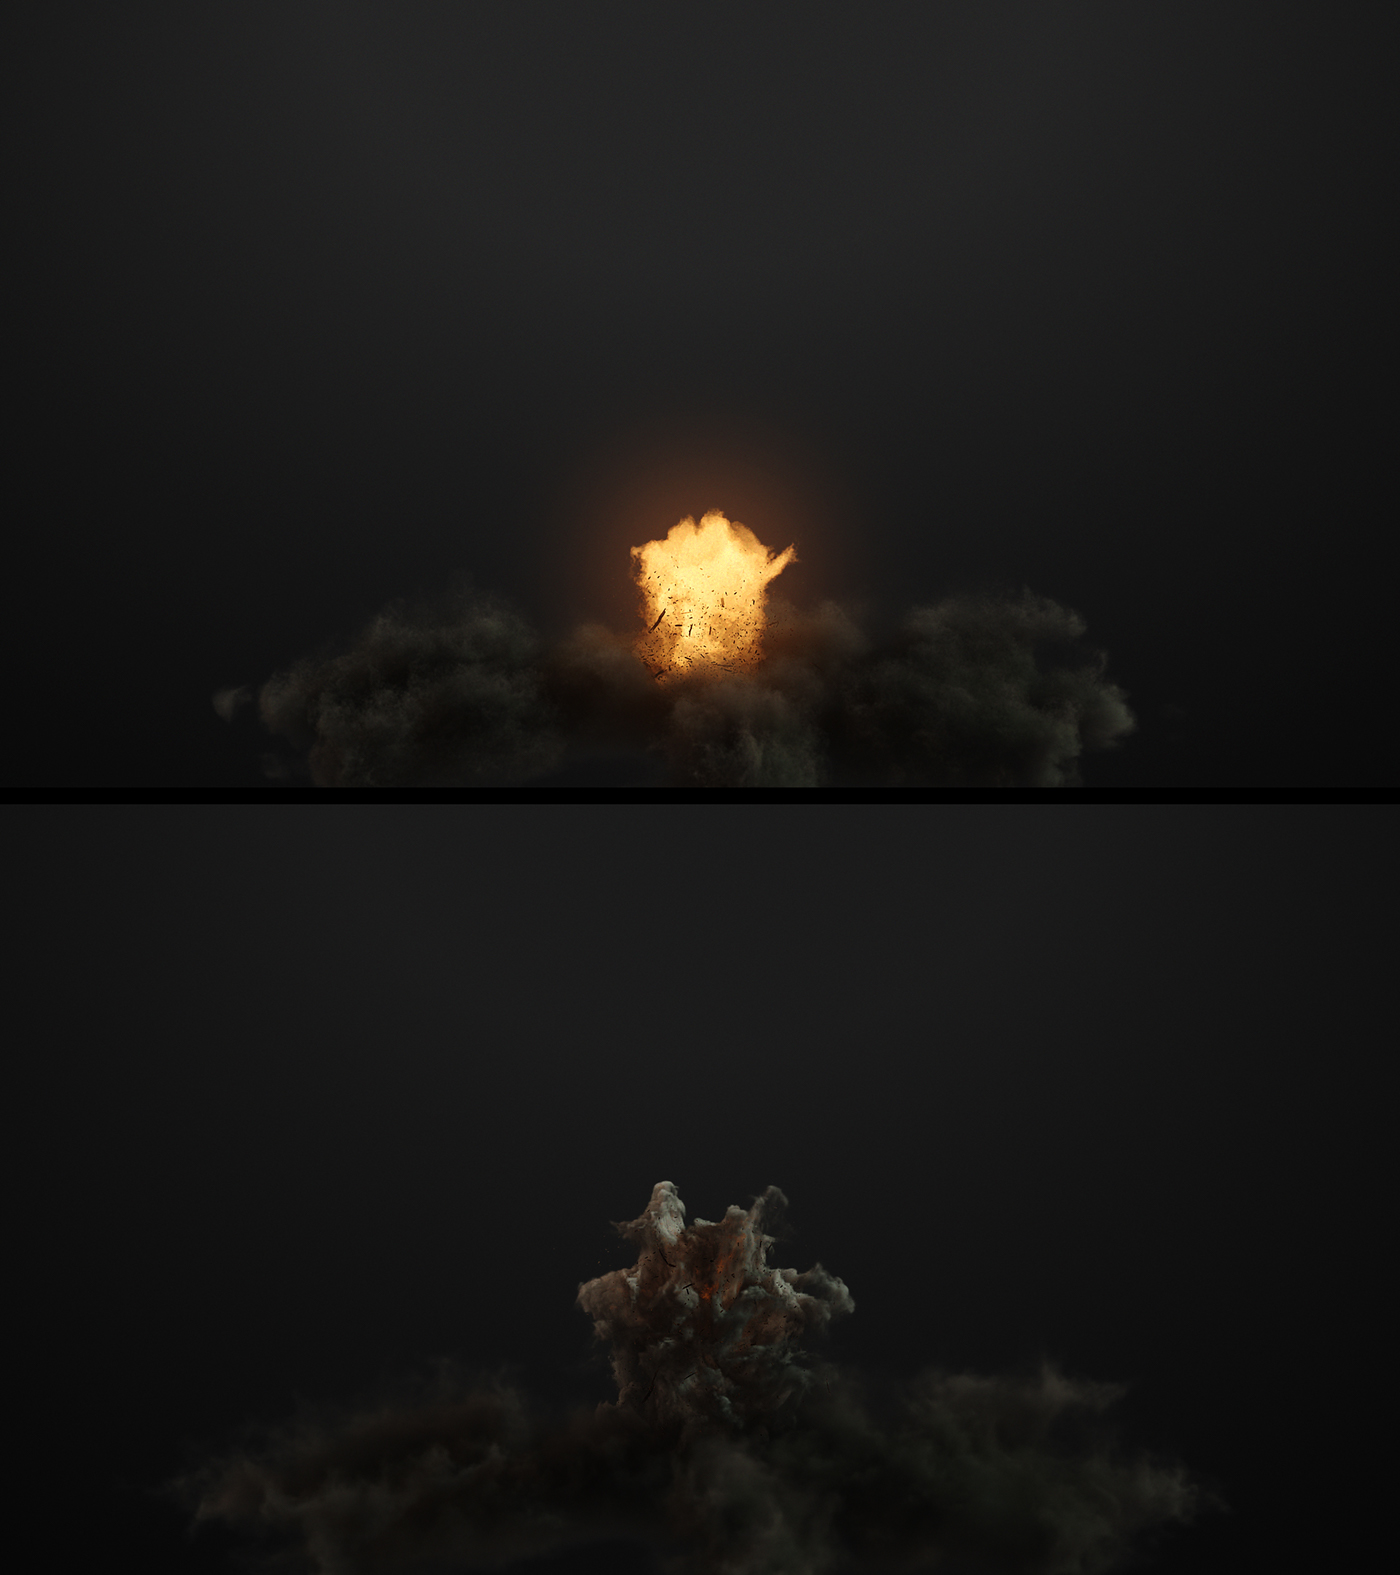 vray 3dsmax after effects photoshop modeling texturing lighting rendering compositing Fluid Simulation FumeFX Zbrush explosion vfx